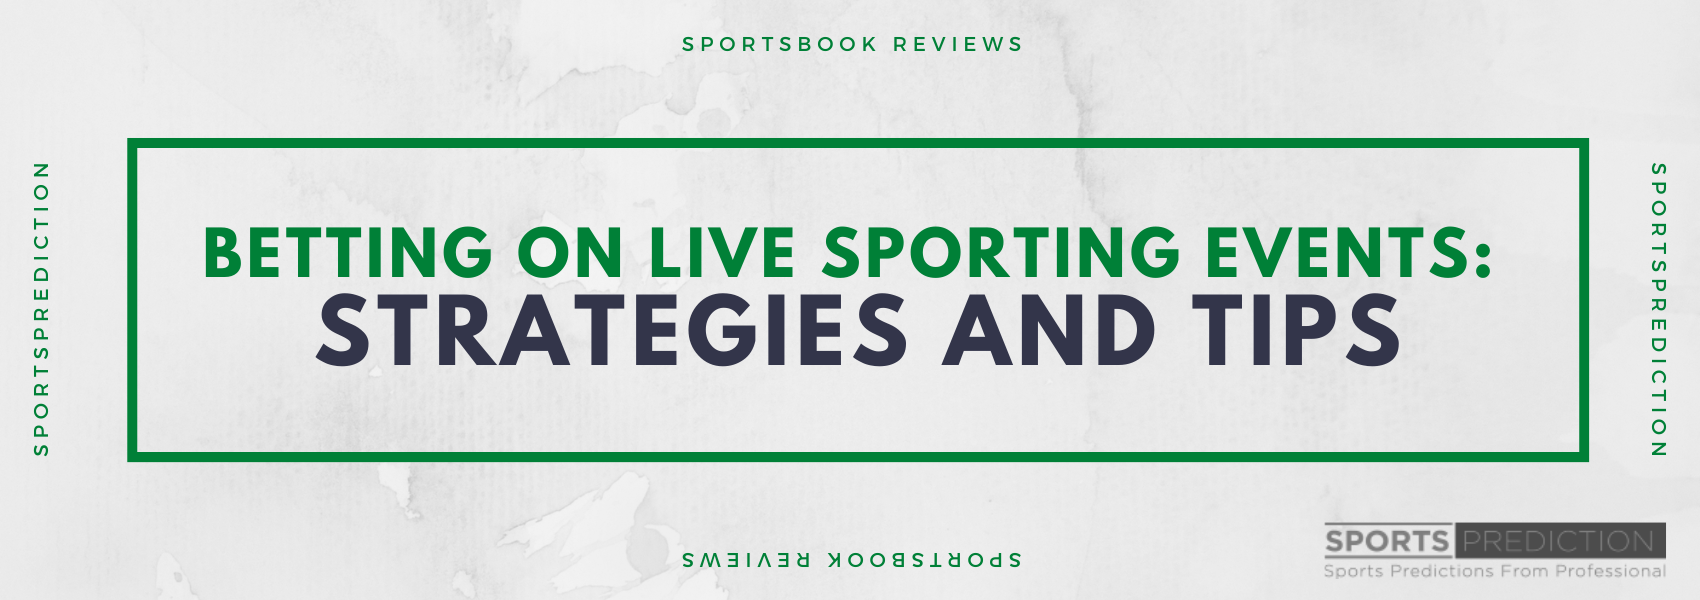 Betting On Live Sporting Events: Strategies And Tips